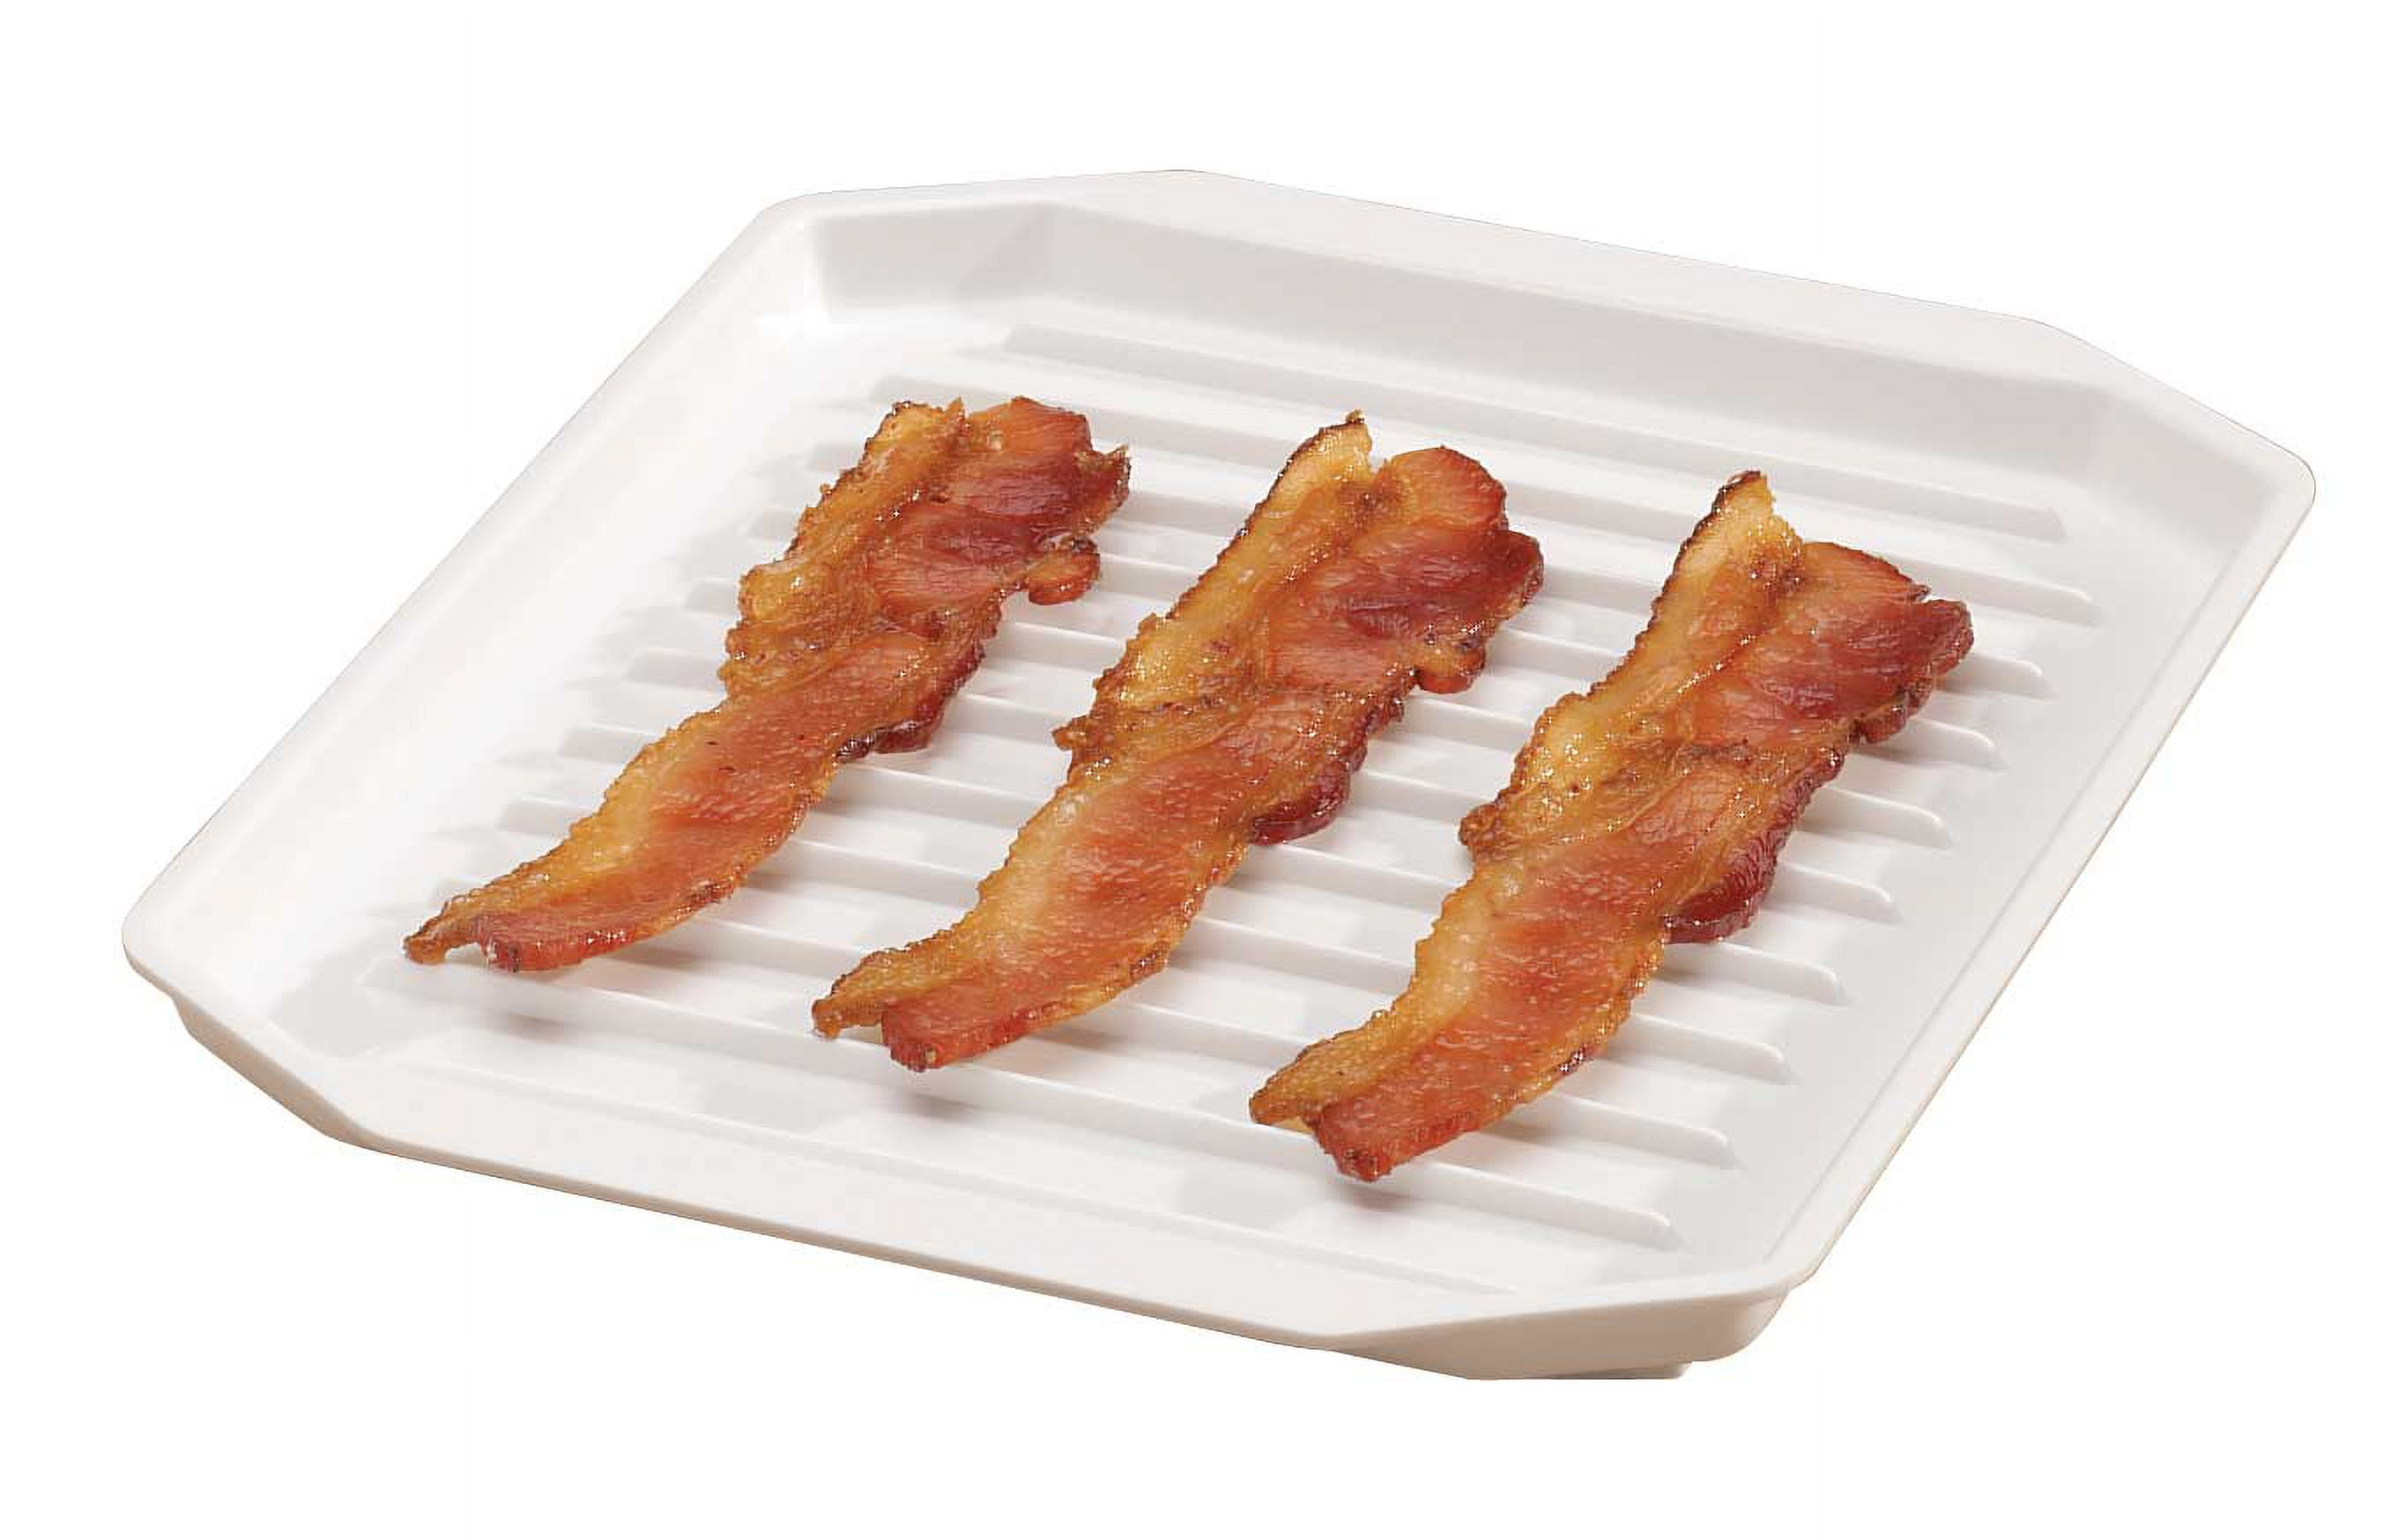 Microwave Bacon Platter 